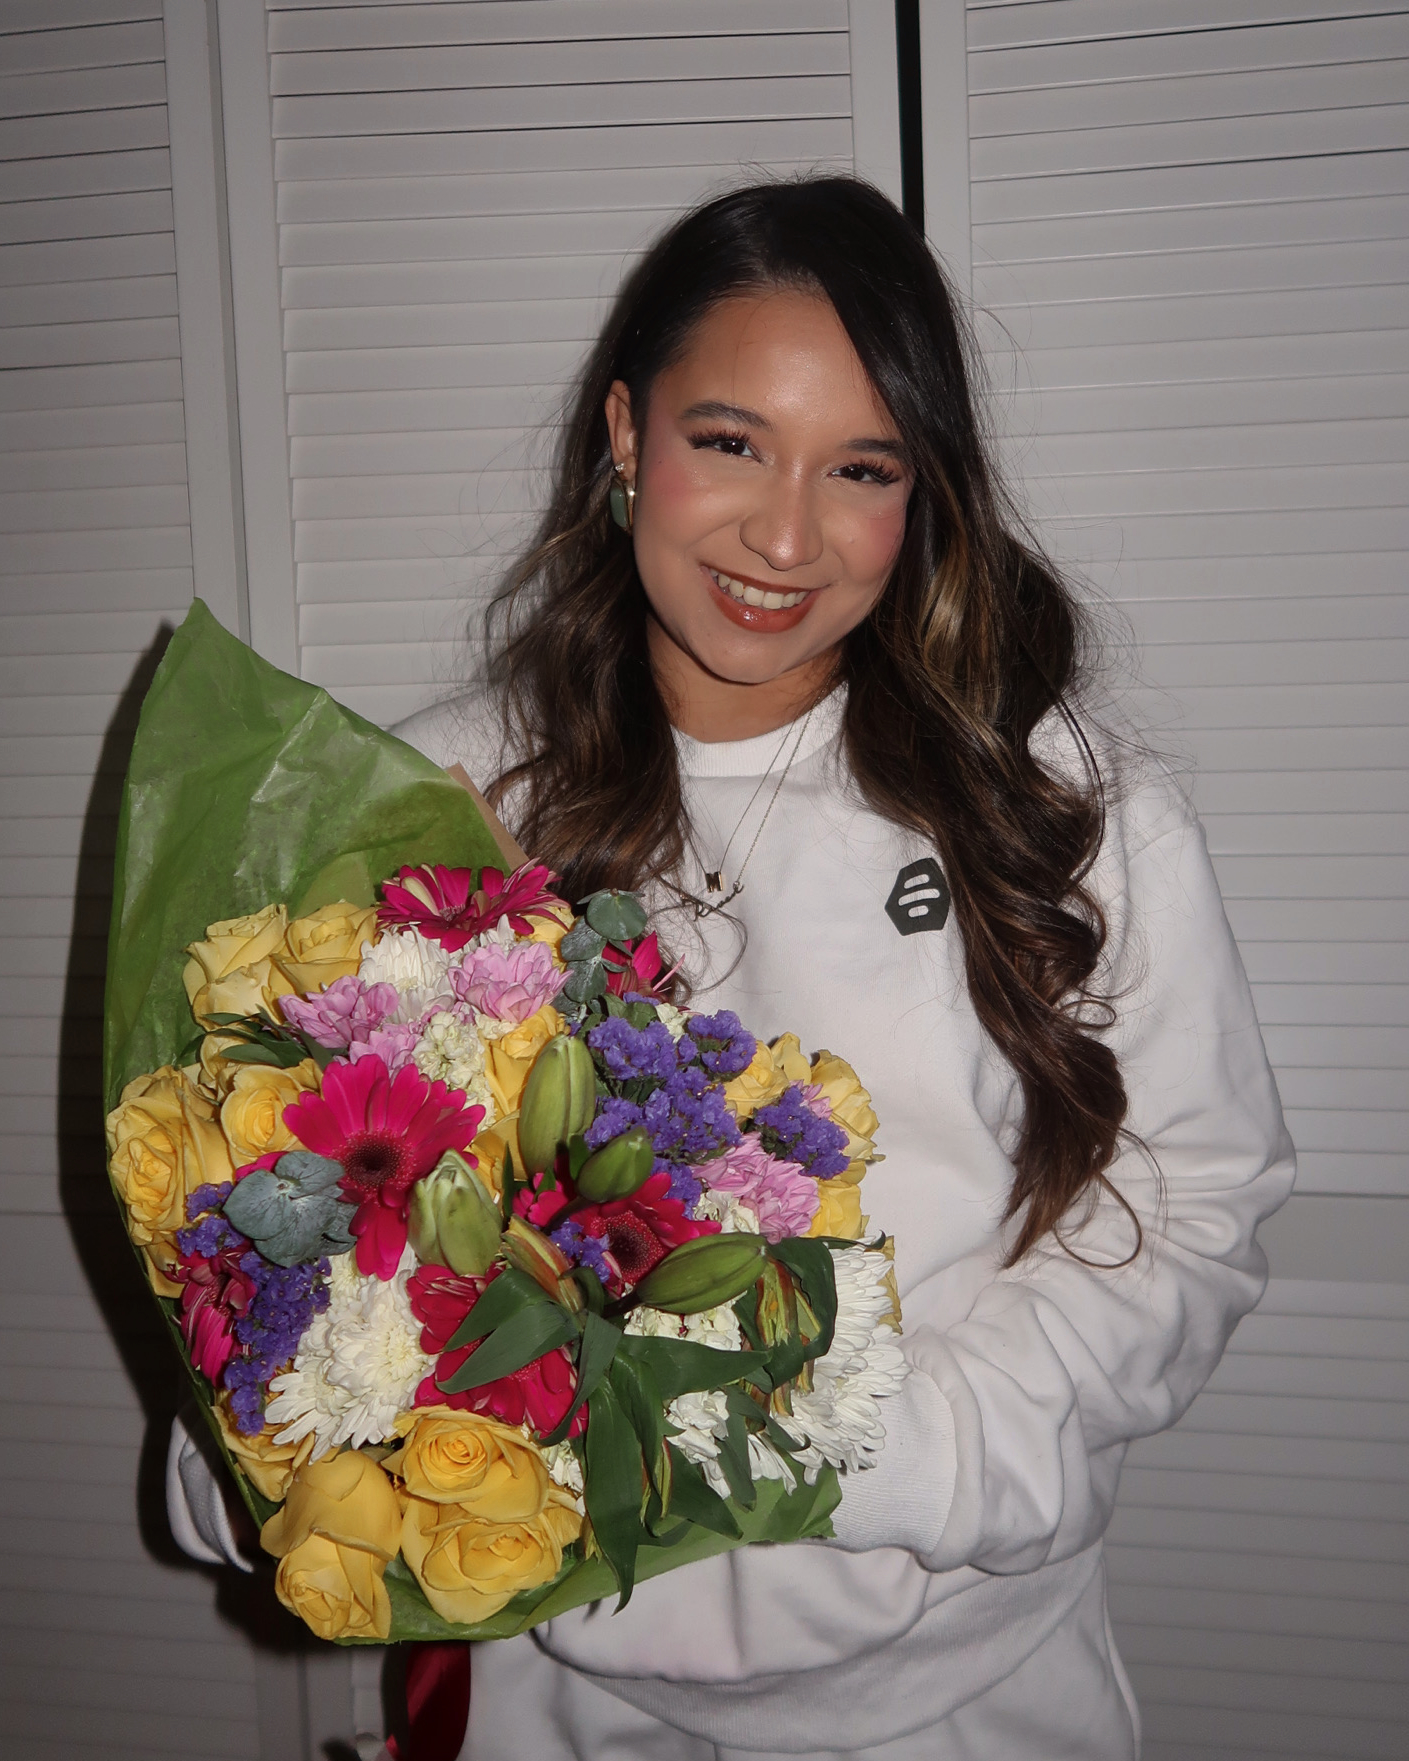 DeBlogger Marina wearing Bumble merch and holding a bouquet of assorted flowers.